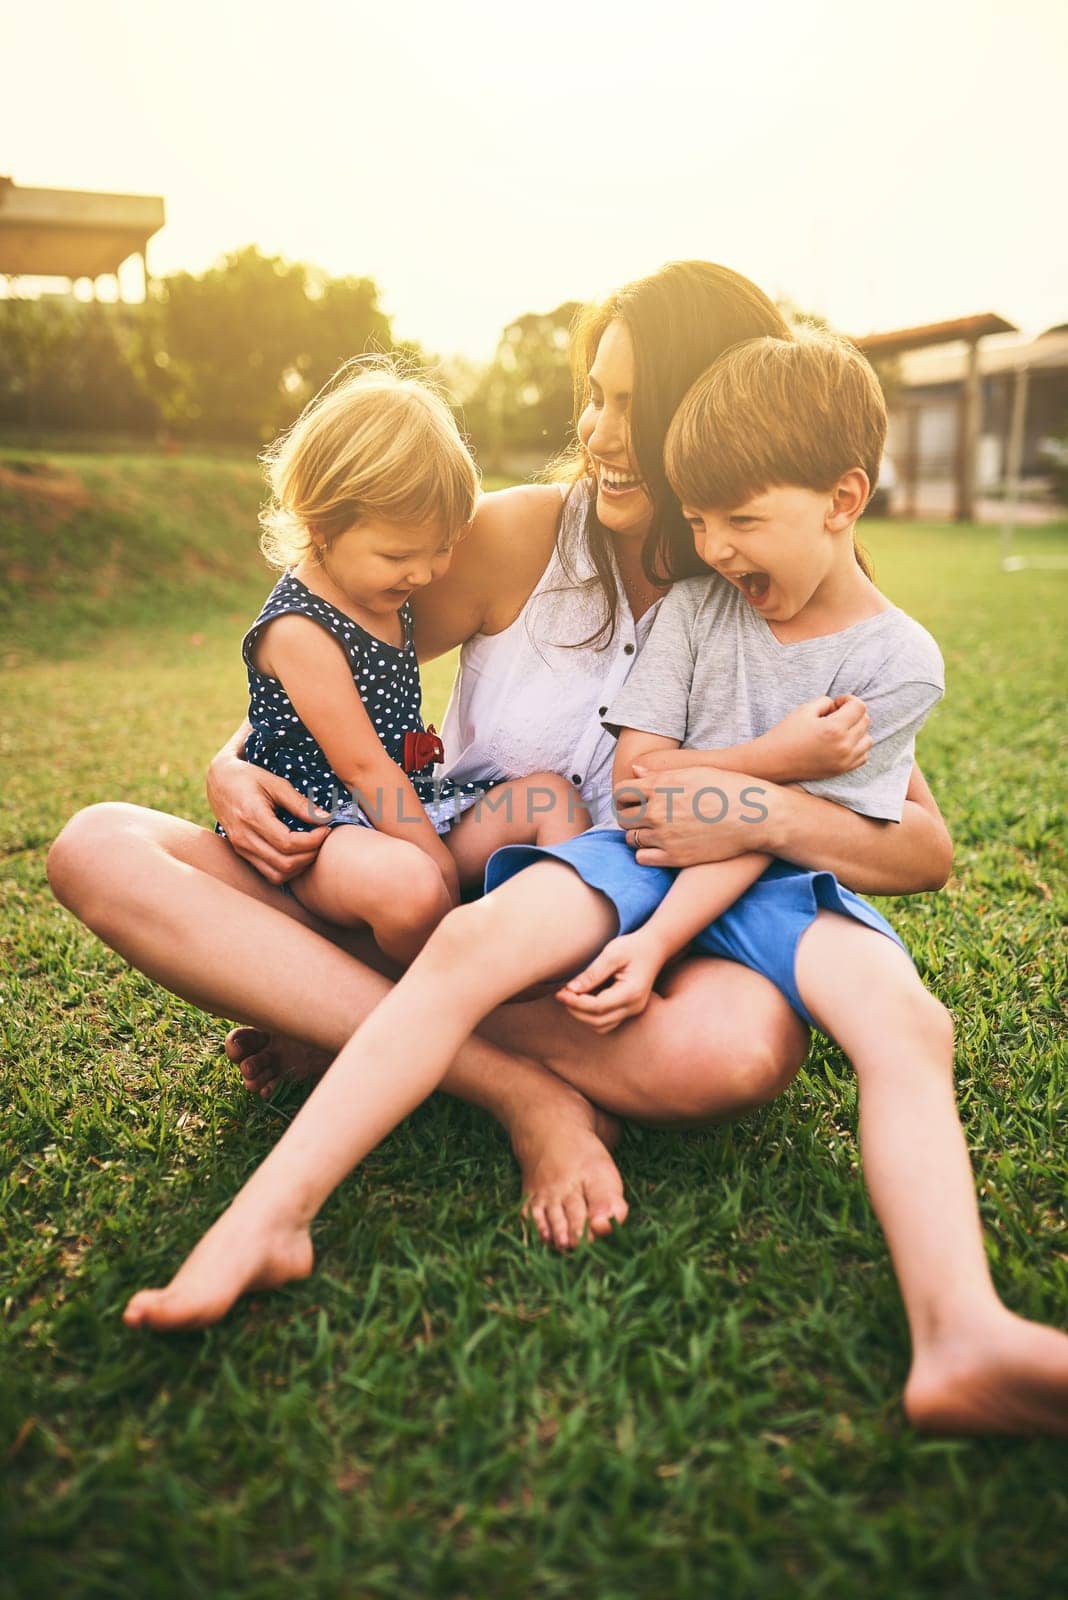 Mother, happy children or hug playing on grass for fun bonding in summer outside a house in nature. Funny mom hugging playful kids siblings on garden playground with happiness of family together.